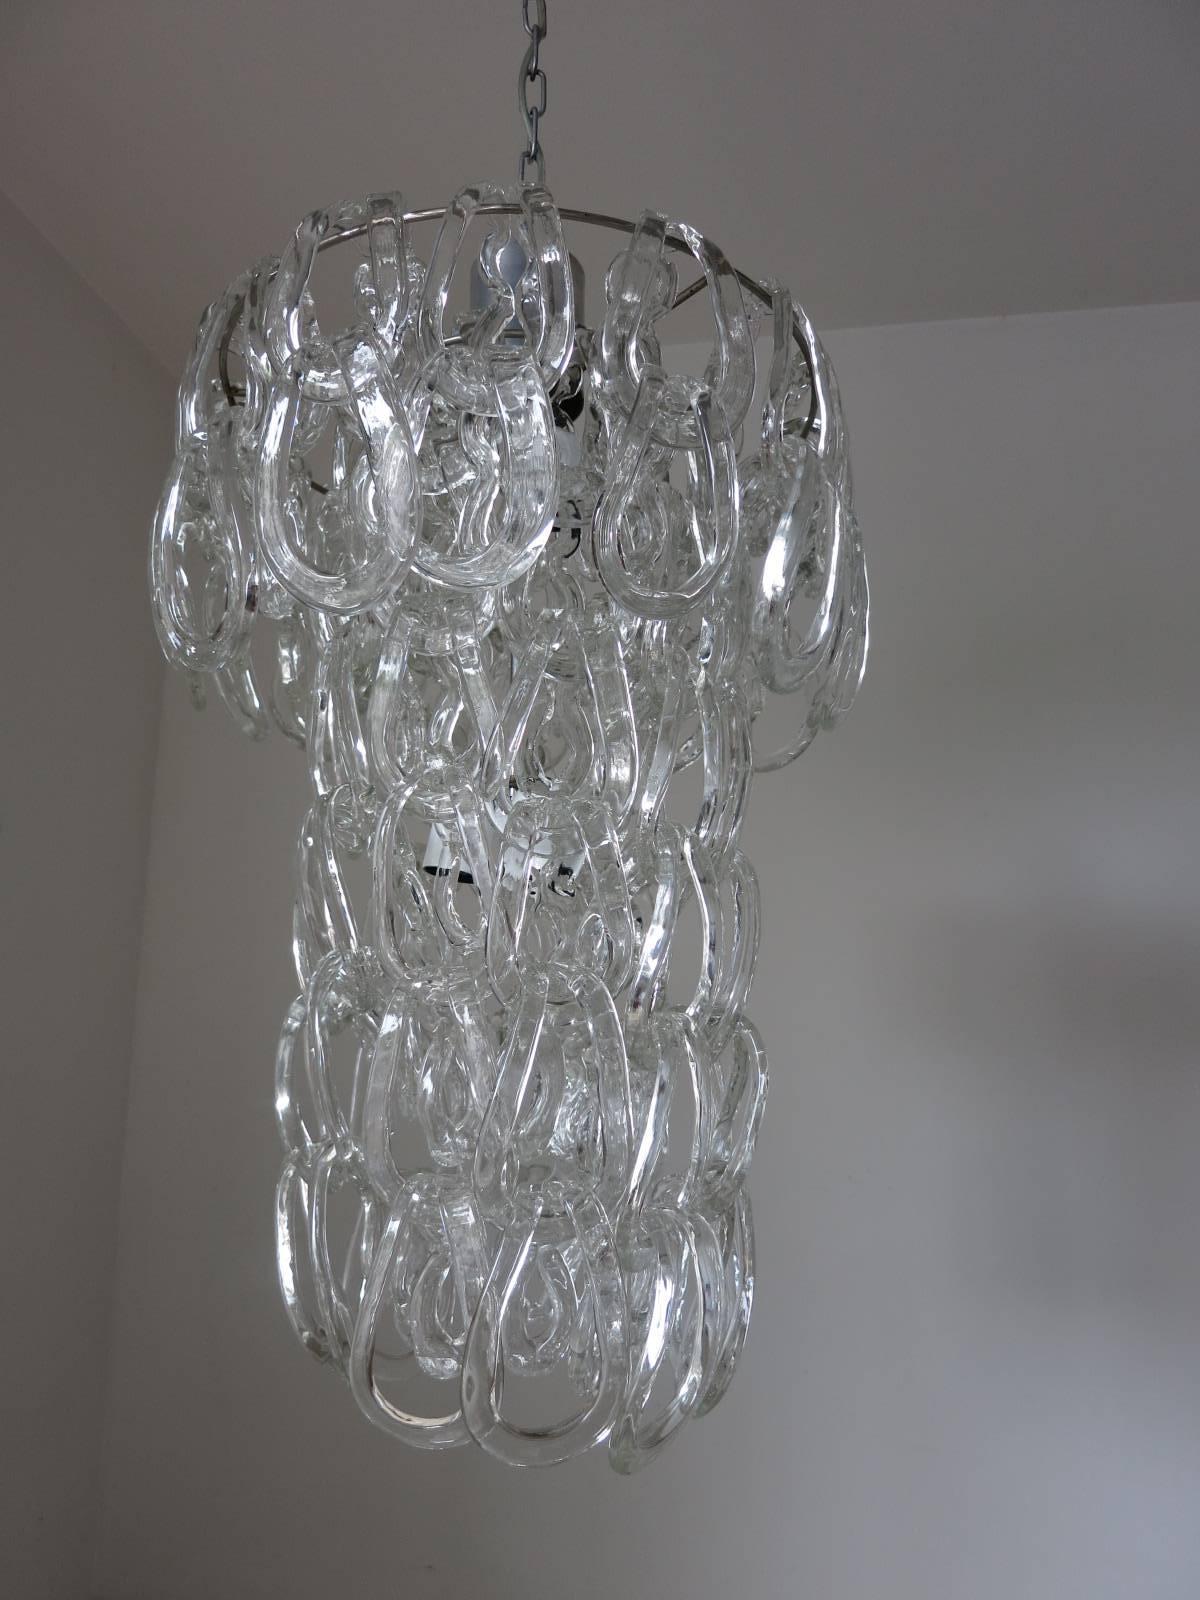 Vintage Italian chandelier with hand blown clear Murano glass links, elegantly fitted on chrome frame and descending into a glass chain / Designed by Angelo Mangiarotti for Vistosi circa 1960’s / Made in Italy
4 lights / E26 or E27 type / max 60W